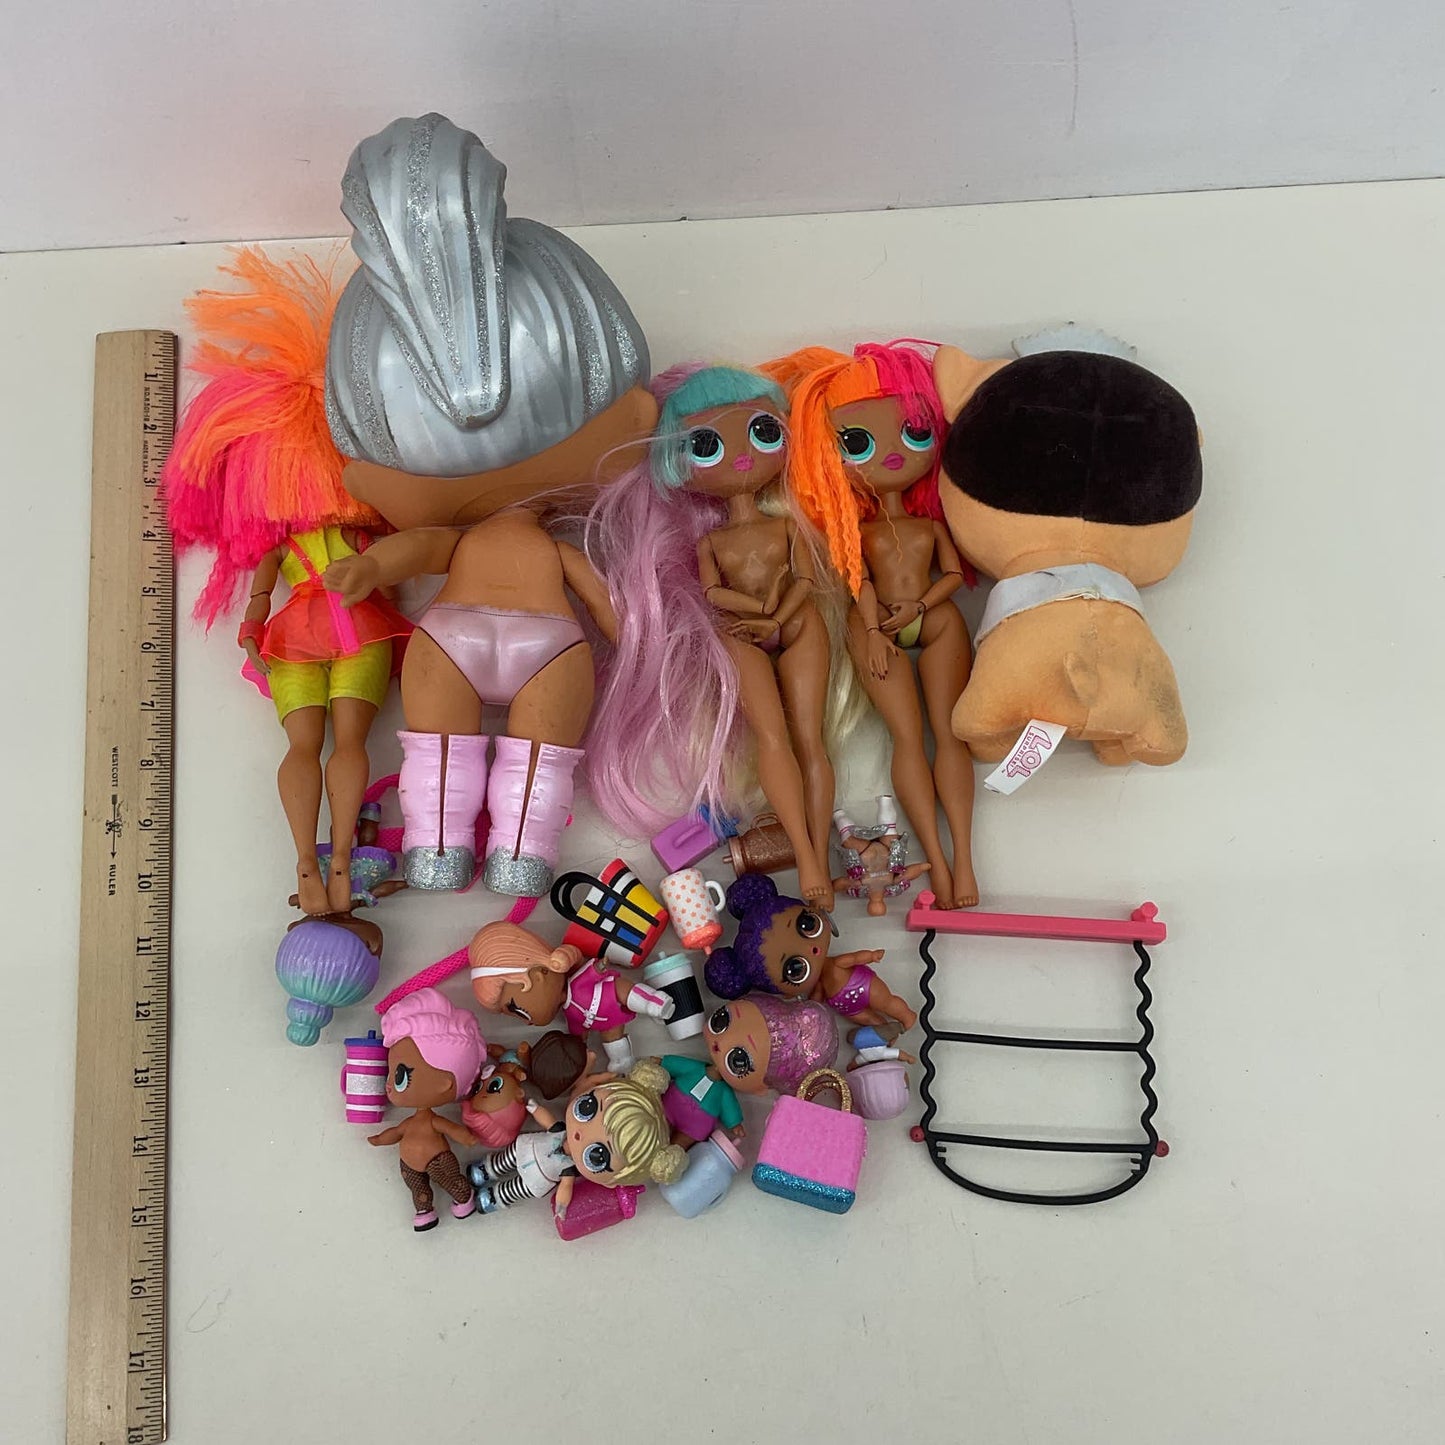 MGA Fashion Doll Mixed LOT LOL OMG Surprise Big Lil Sistas Toys Figures Used - Warehouse Toys